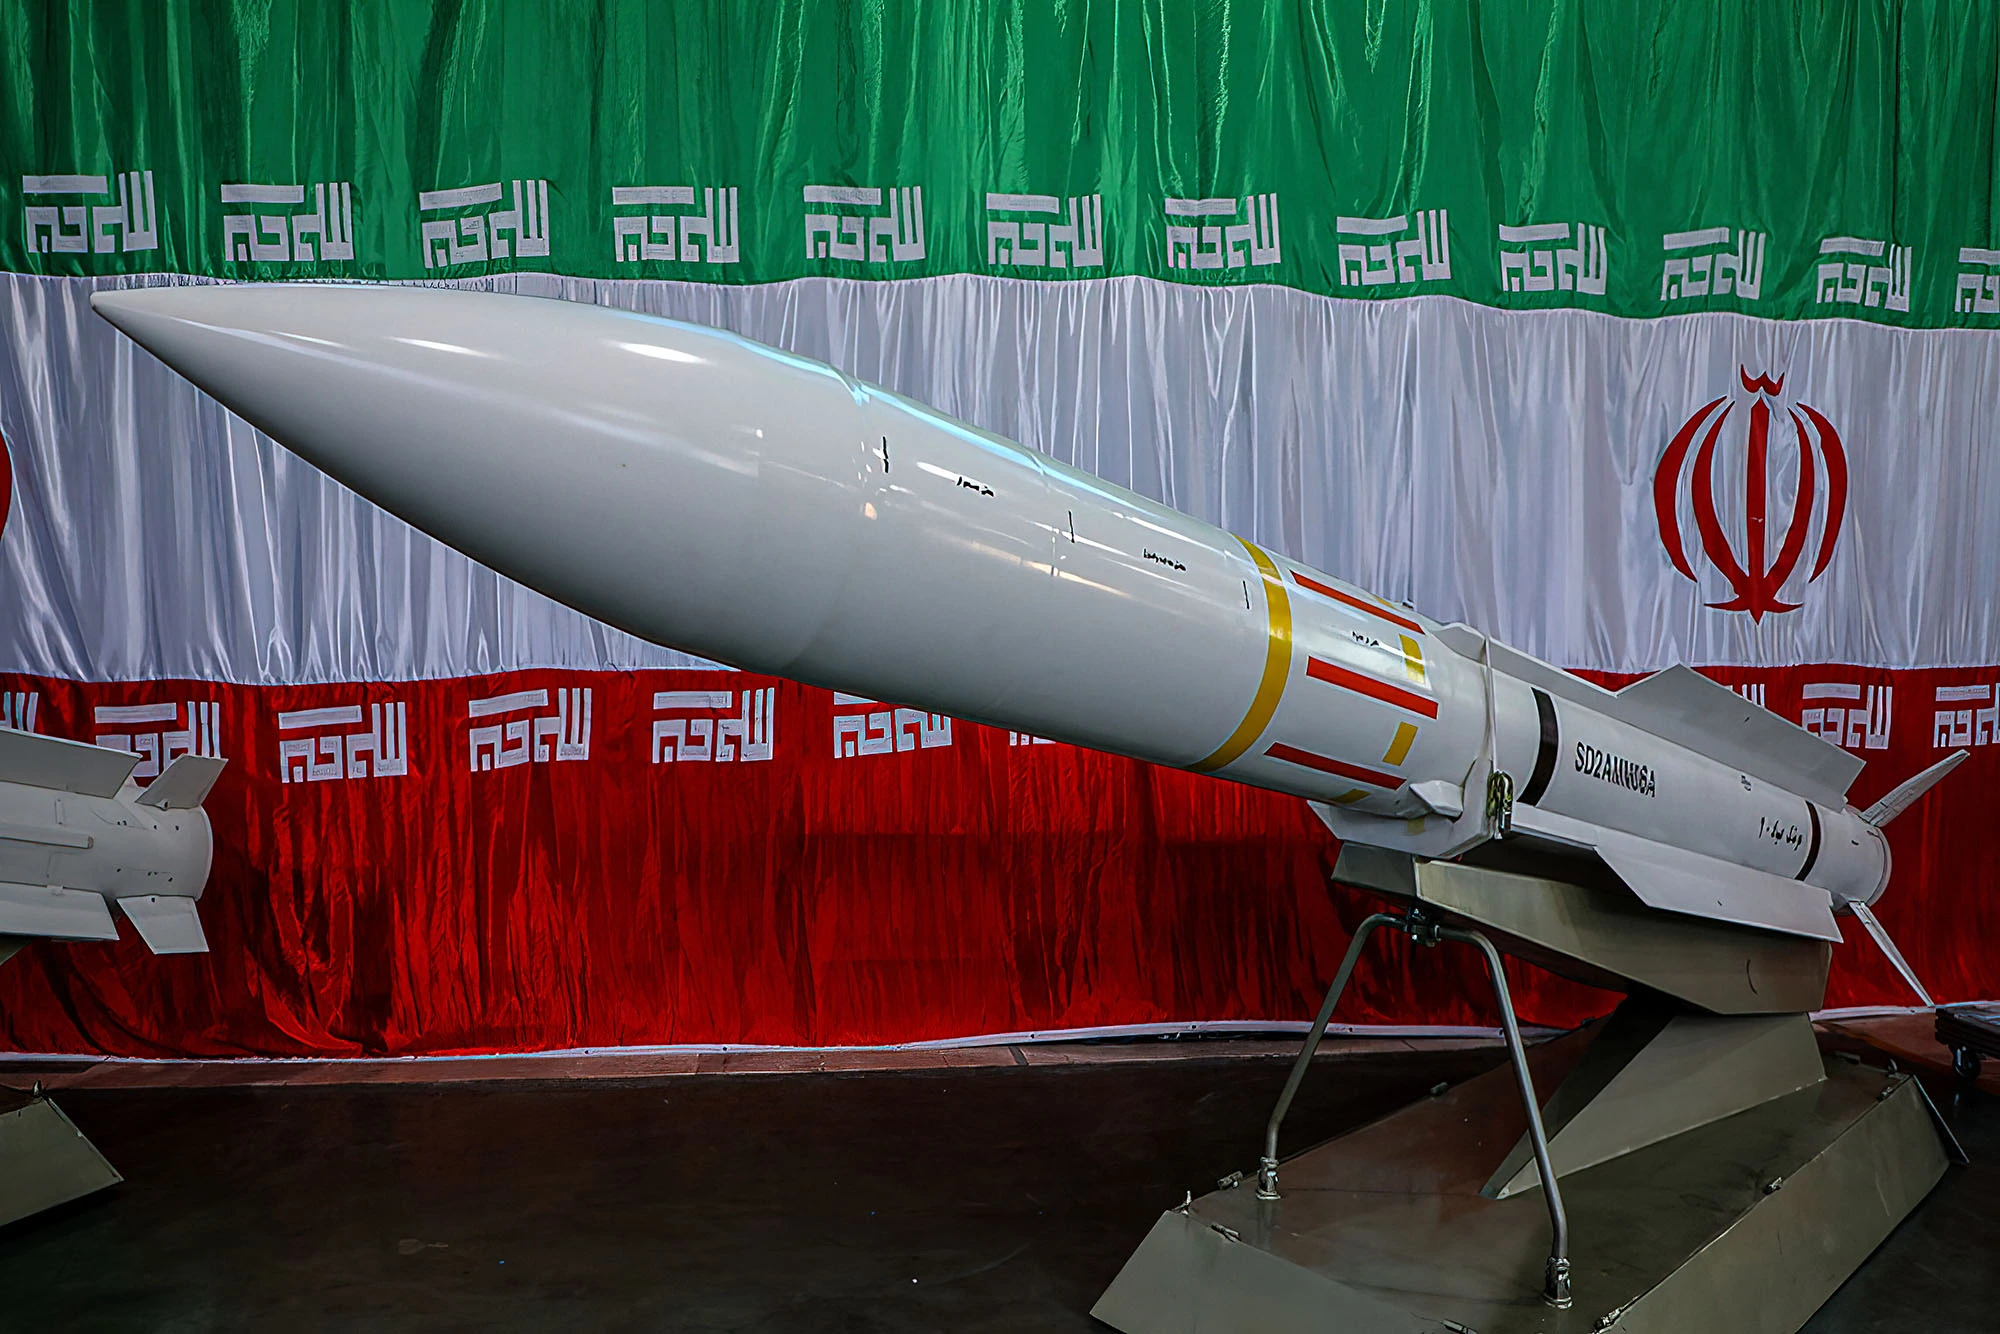 Iran claims it has developed a hypersonic missile